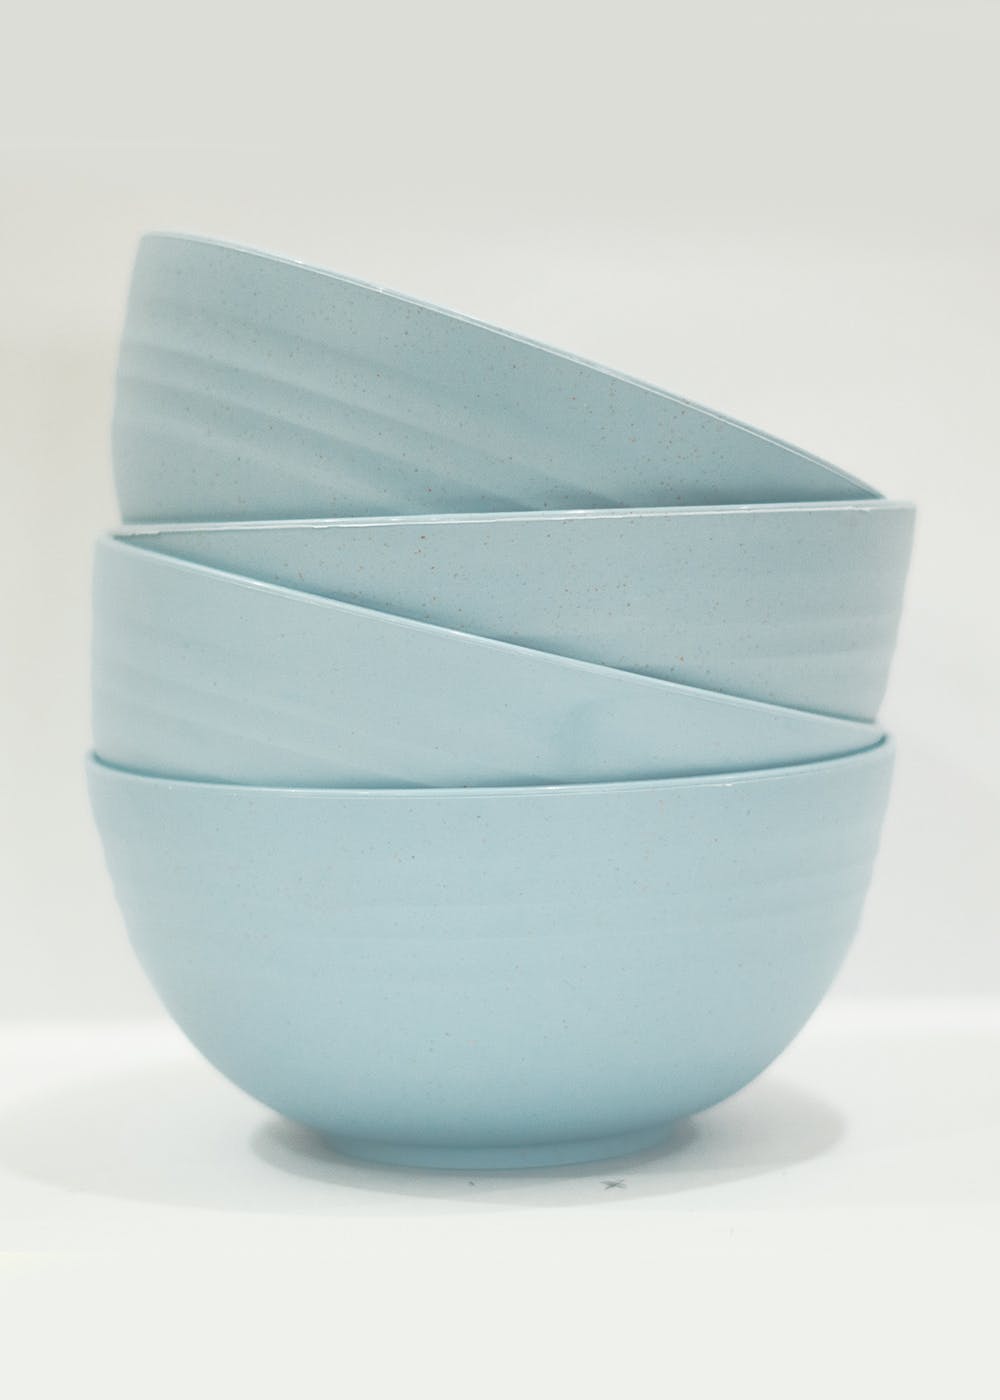 Unbreakable And Eco-Friendly Lightweight Reusable Bowls - Blue